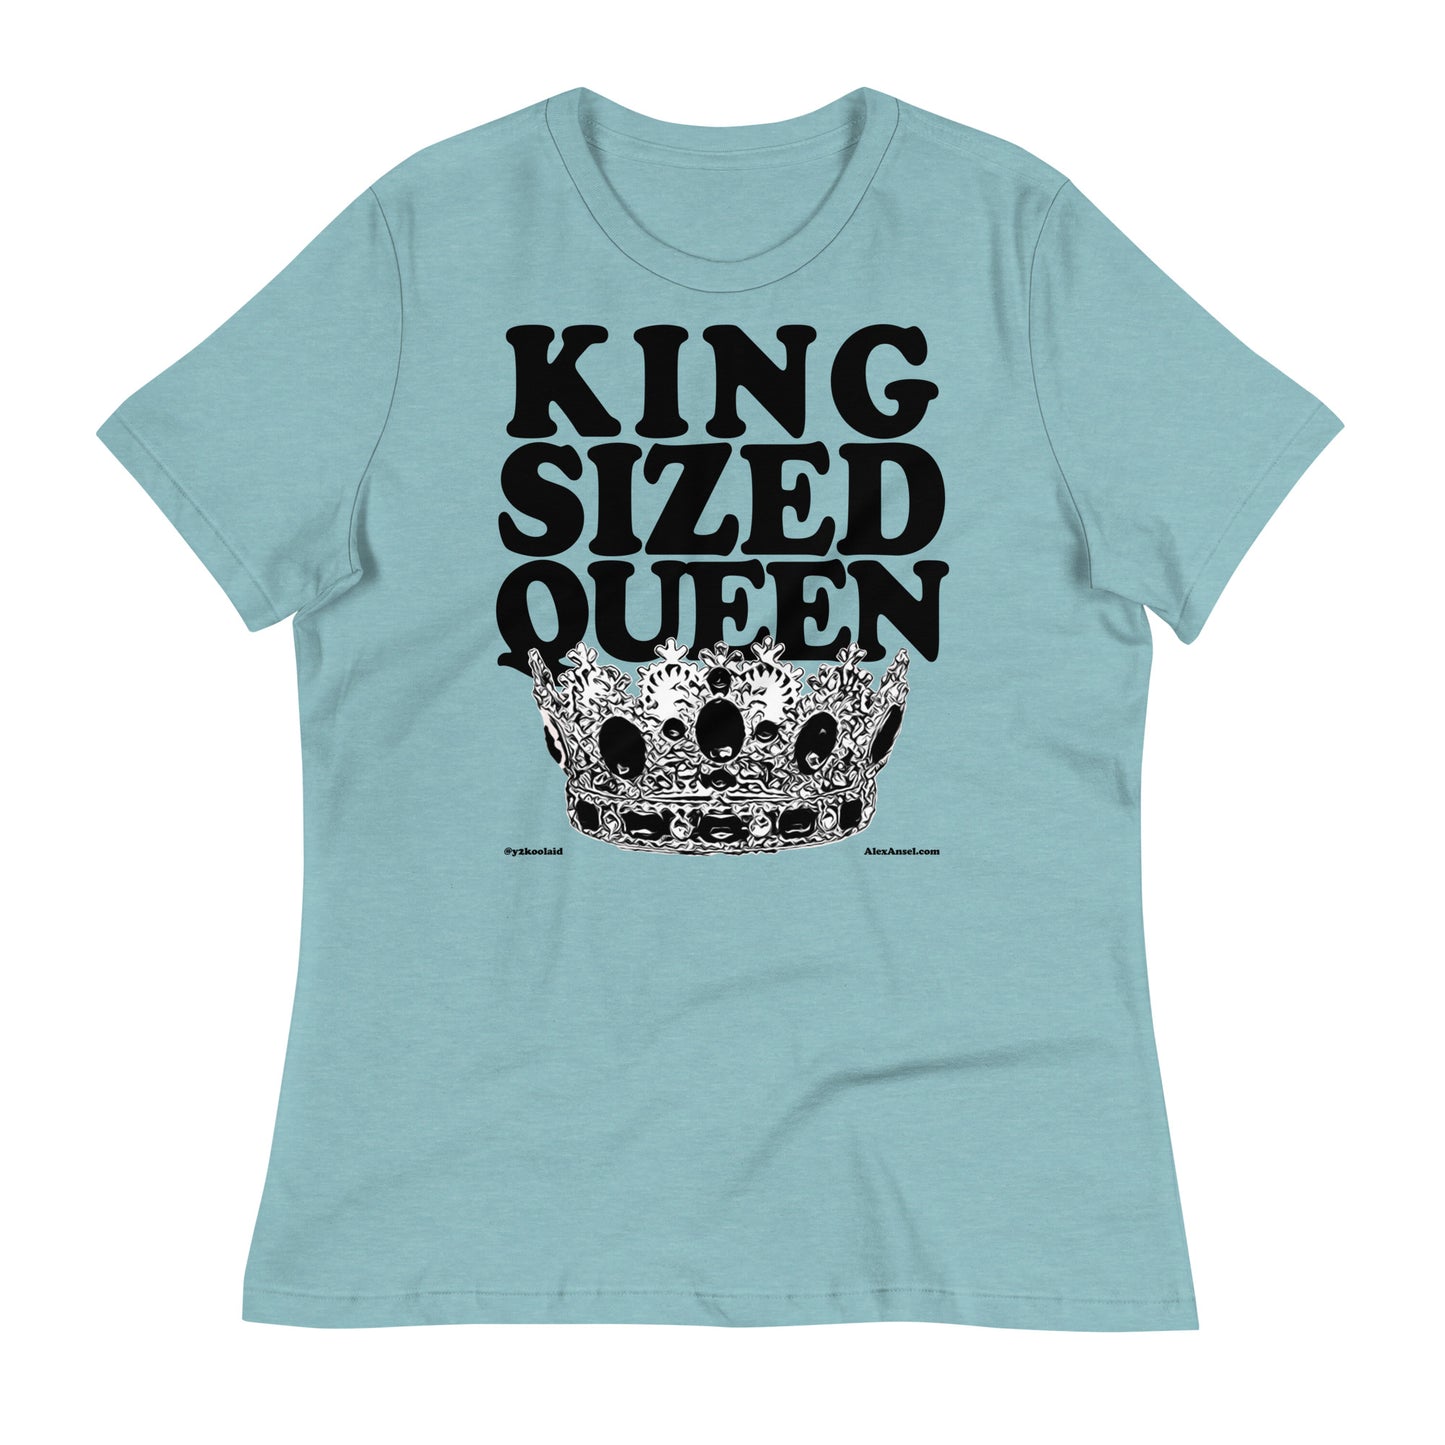 KING SIZED QUEEN (b)